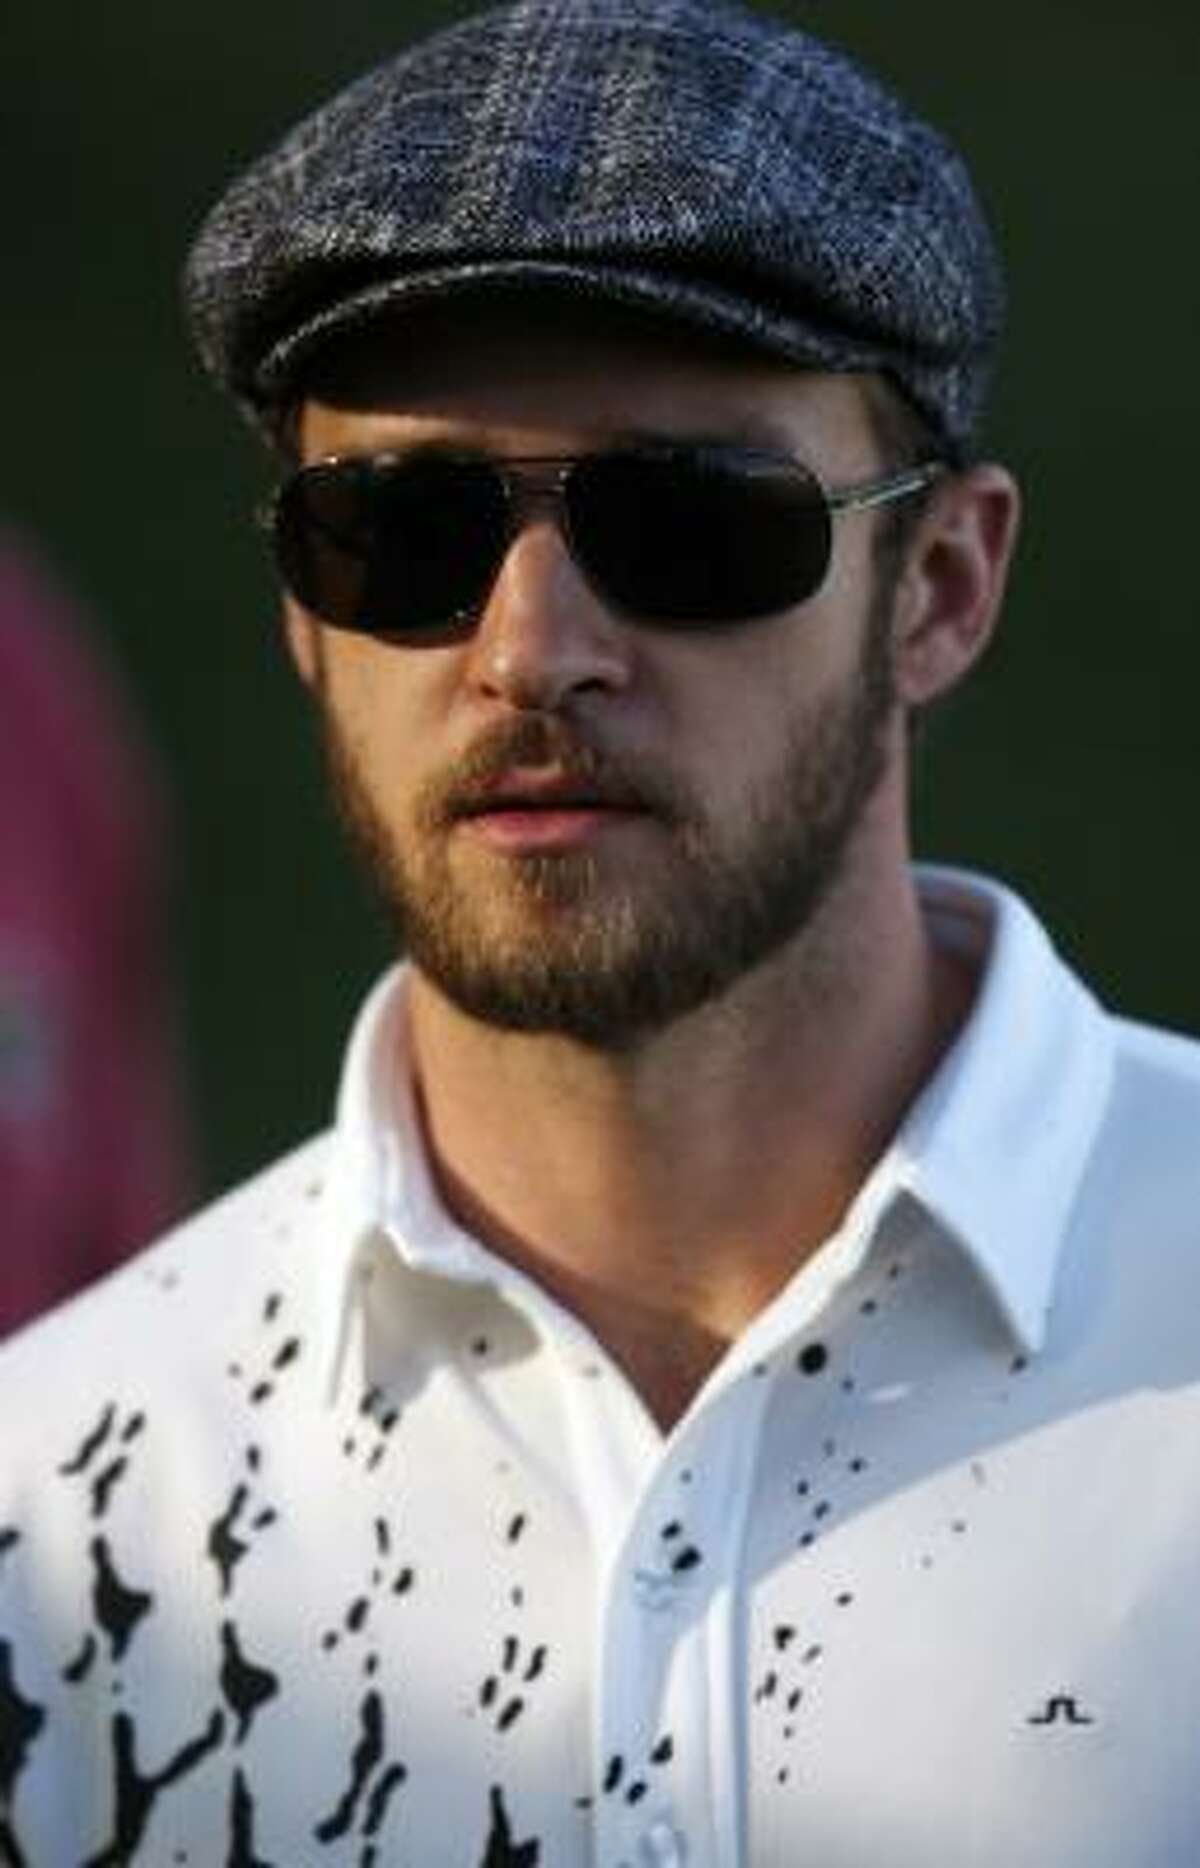 Justin Timberlake sports the flat cap on the golf course.